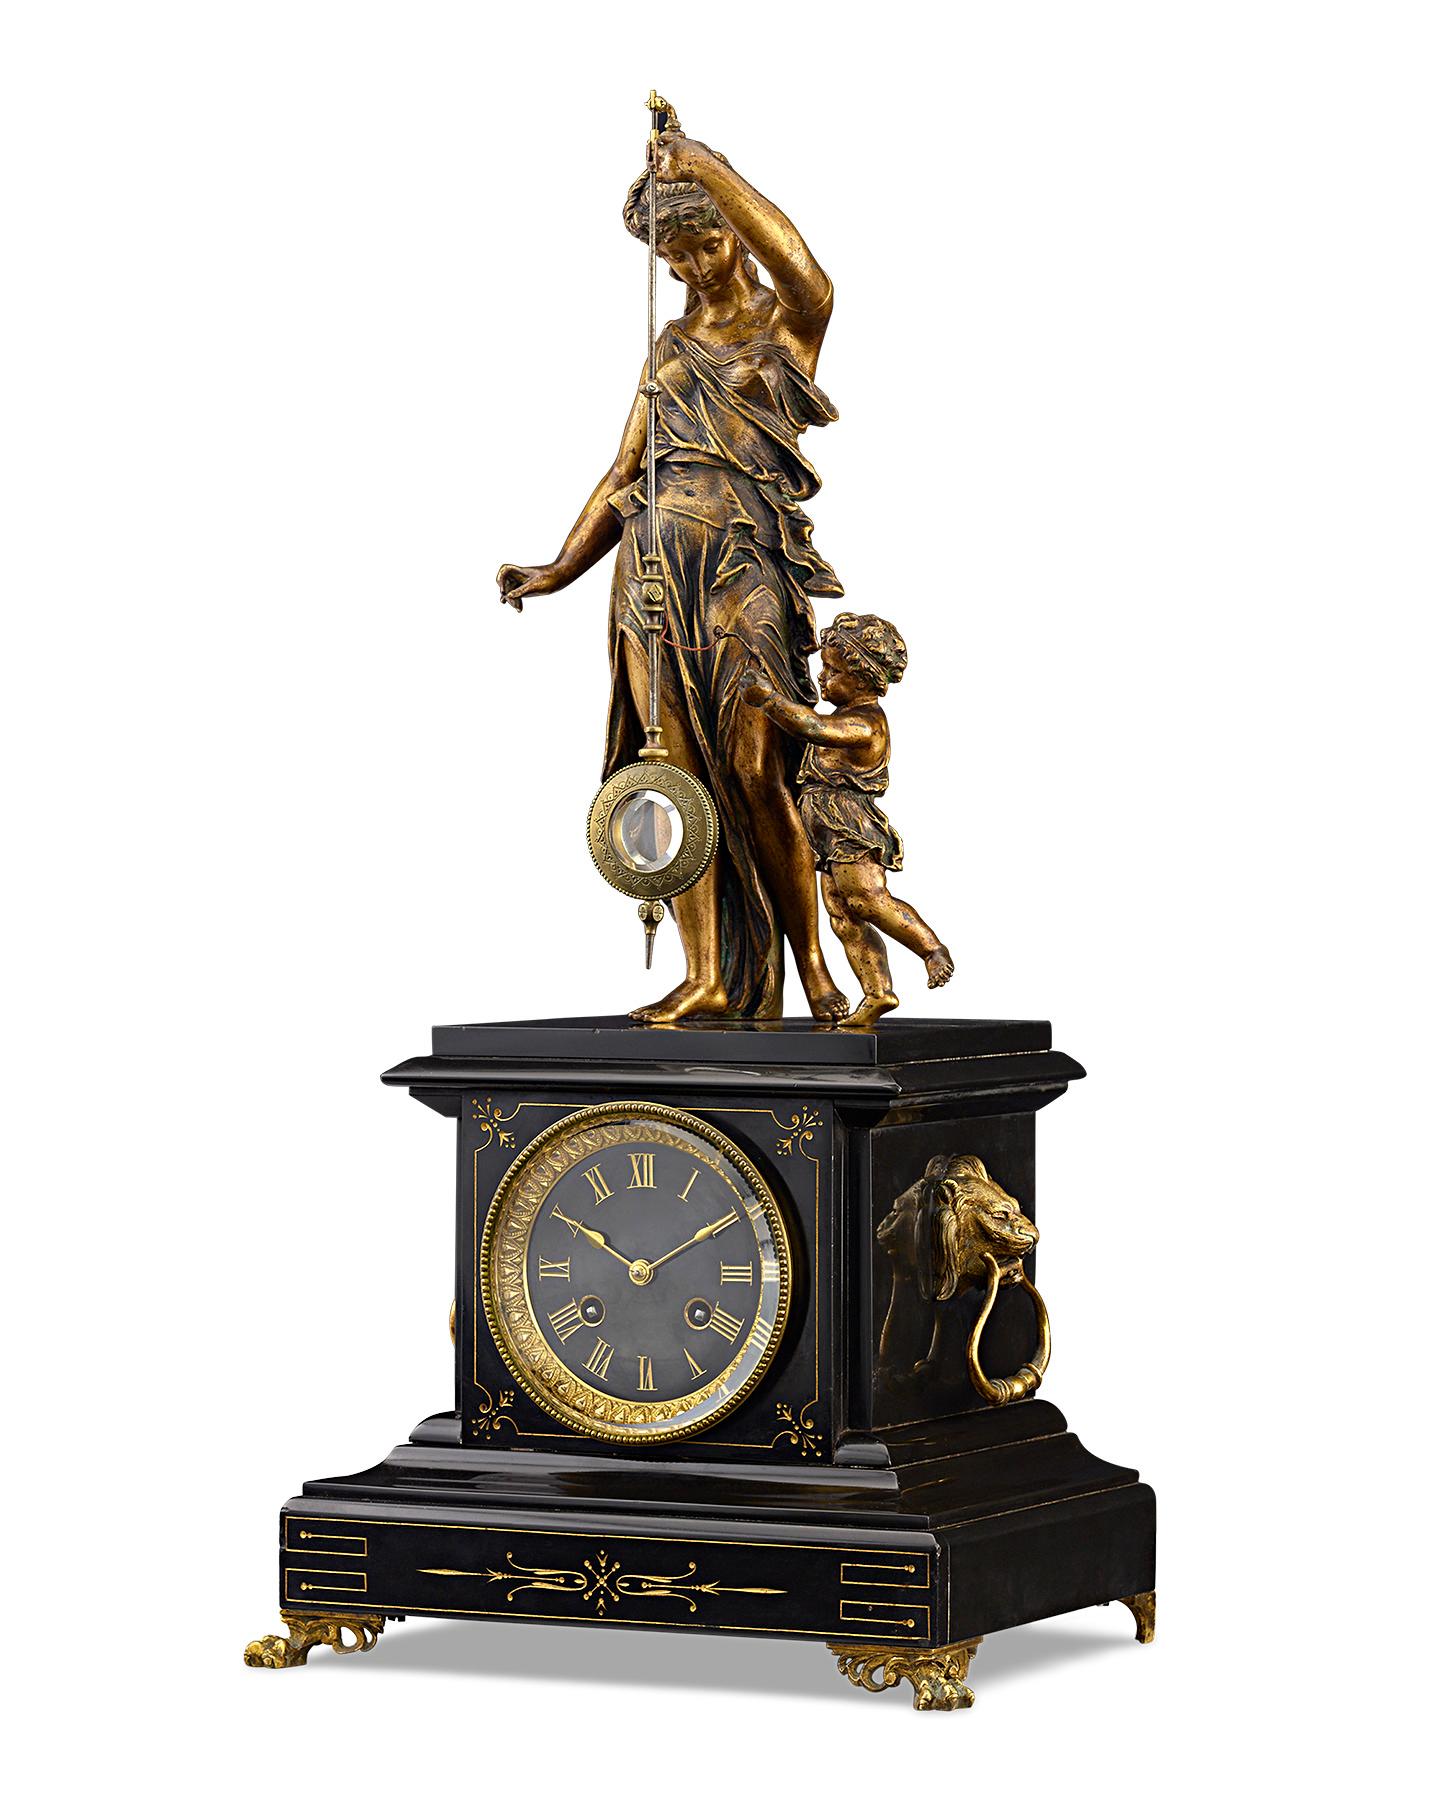 This rare and elegant 19th-century French mystery clock is crowned by a graceful Neoclassical bronze of Ceres, the Roman goddess of agriculture and motherhood. The maternal figure gracefully supports a pendulum terminating in a glass bob, while a